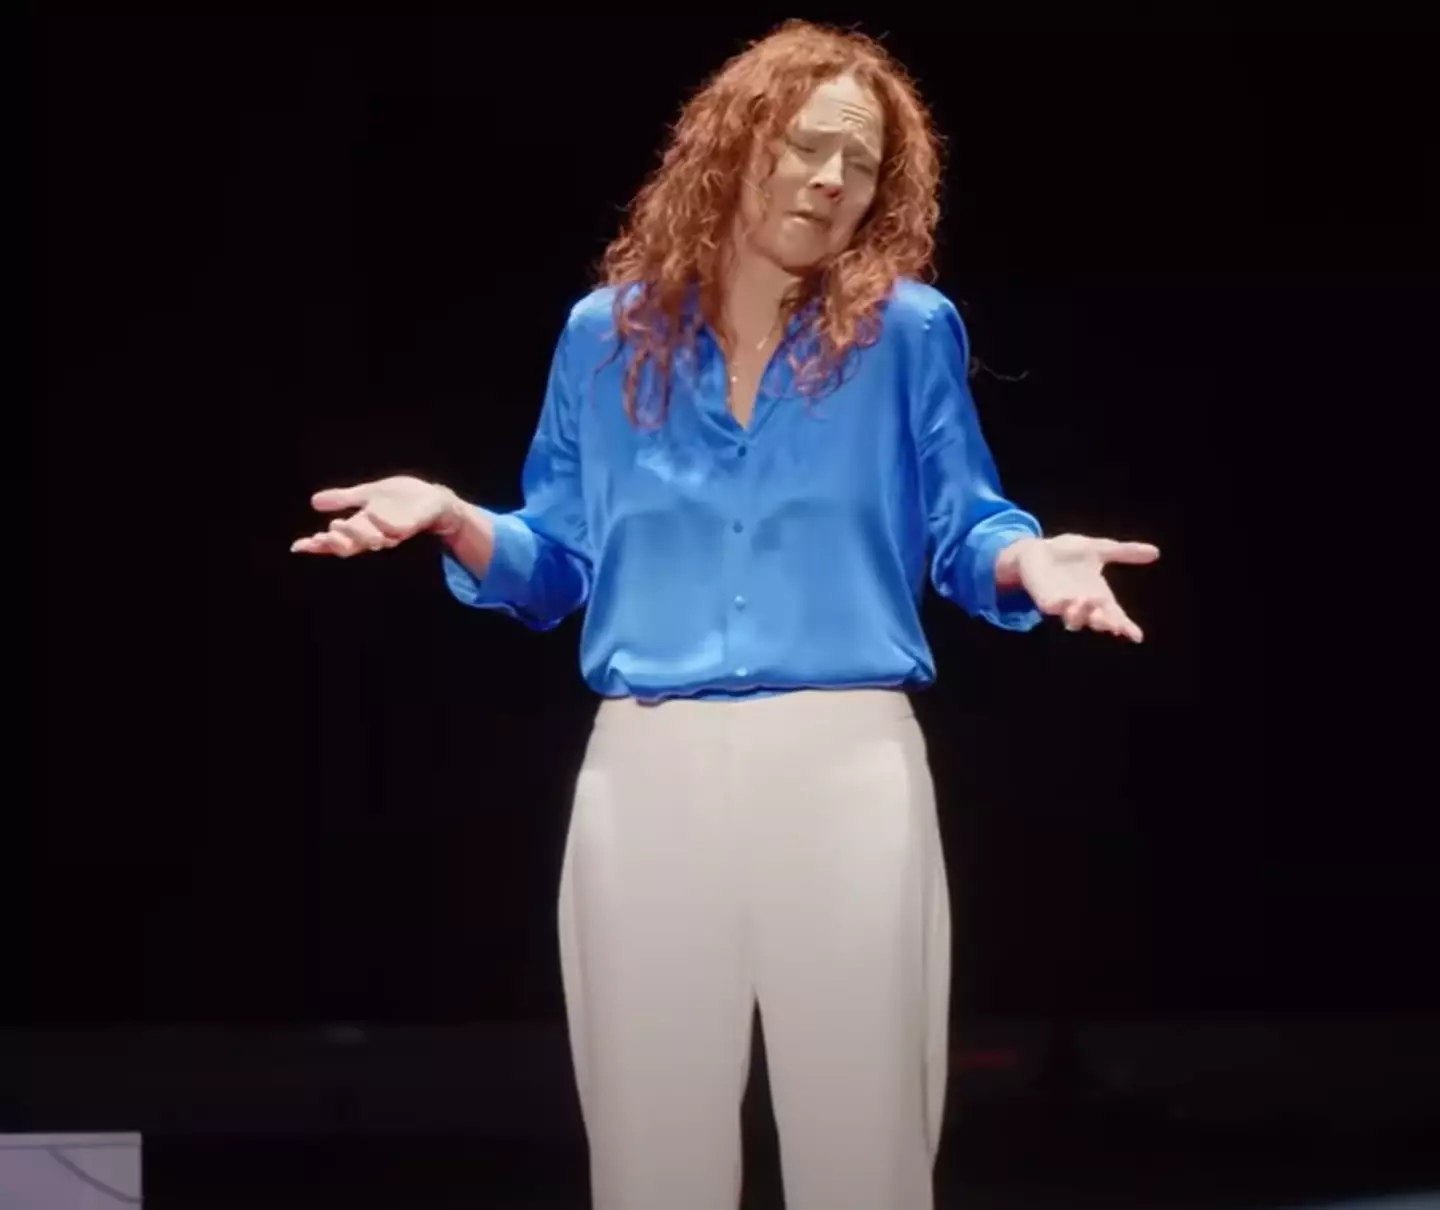 In a TED Talk Dr Robin Buckley spoke about why she gave her daughter a vibrator when she was 13.